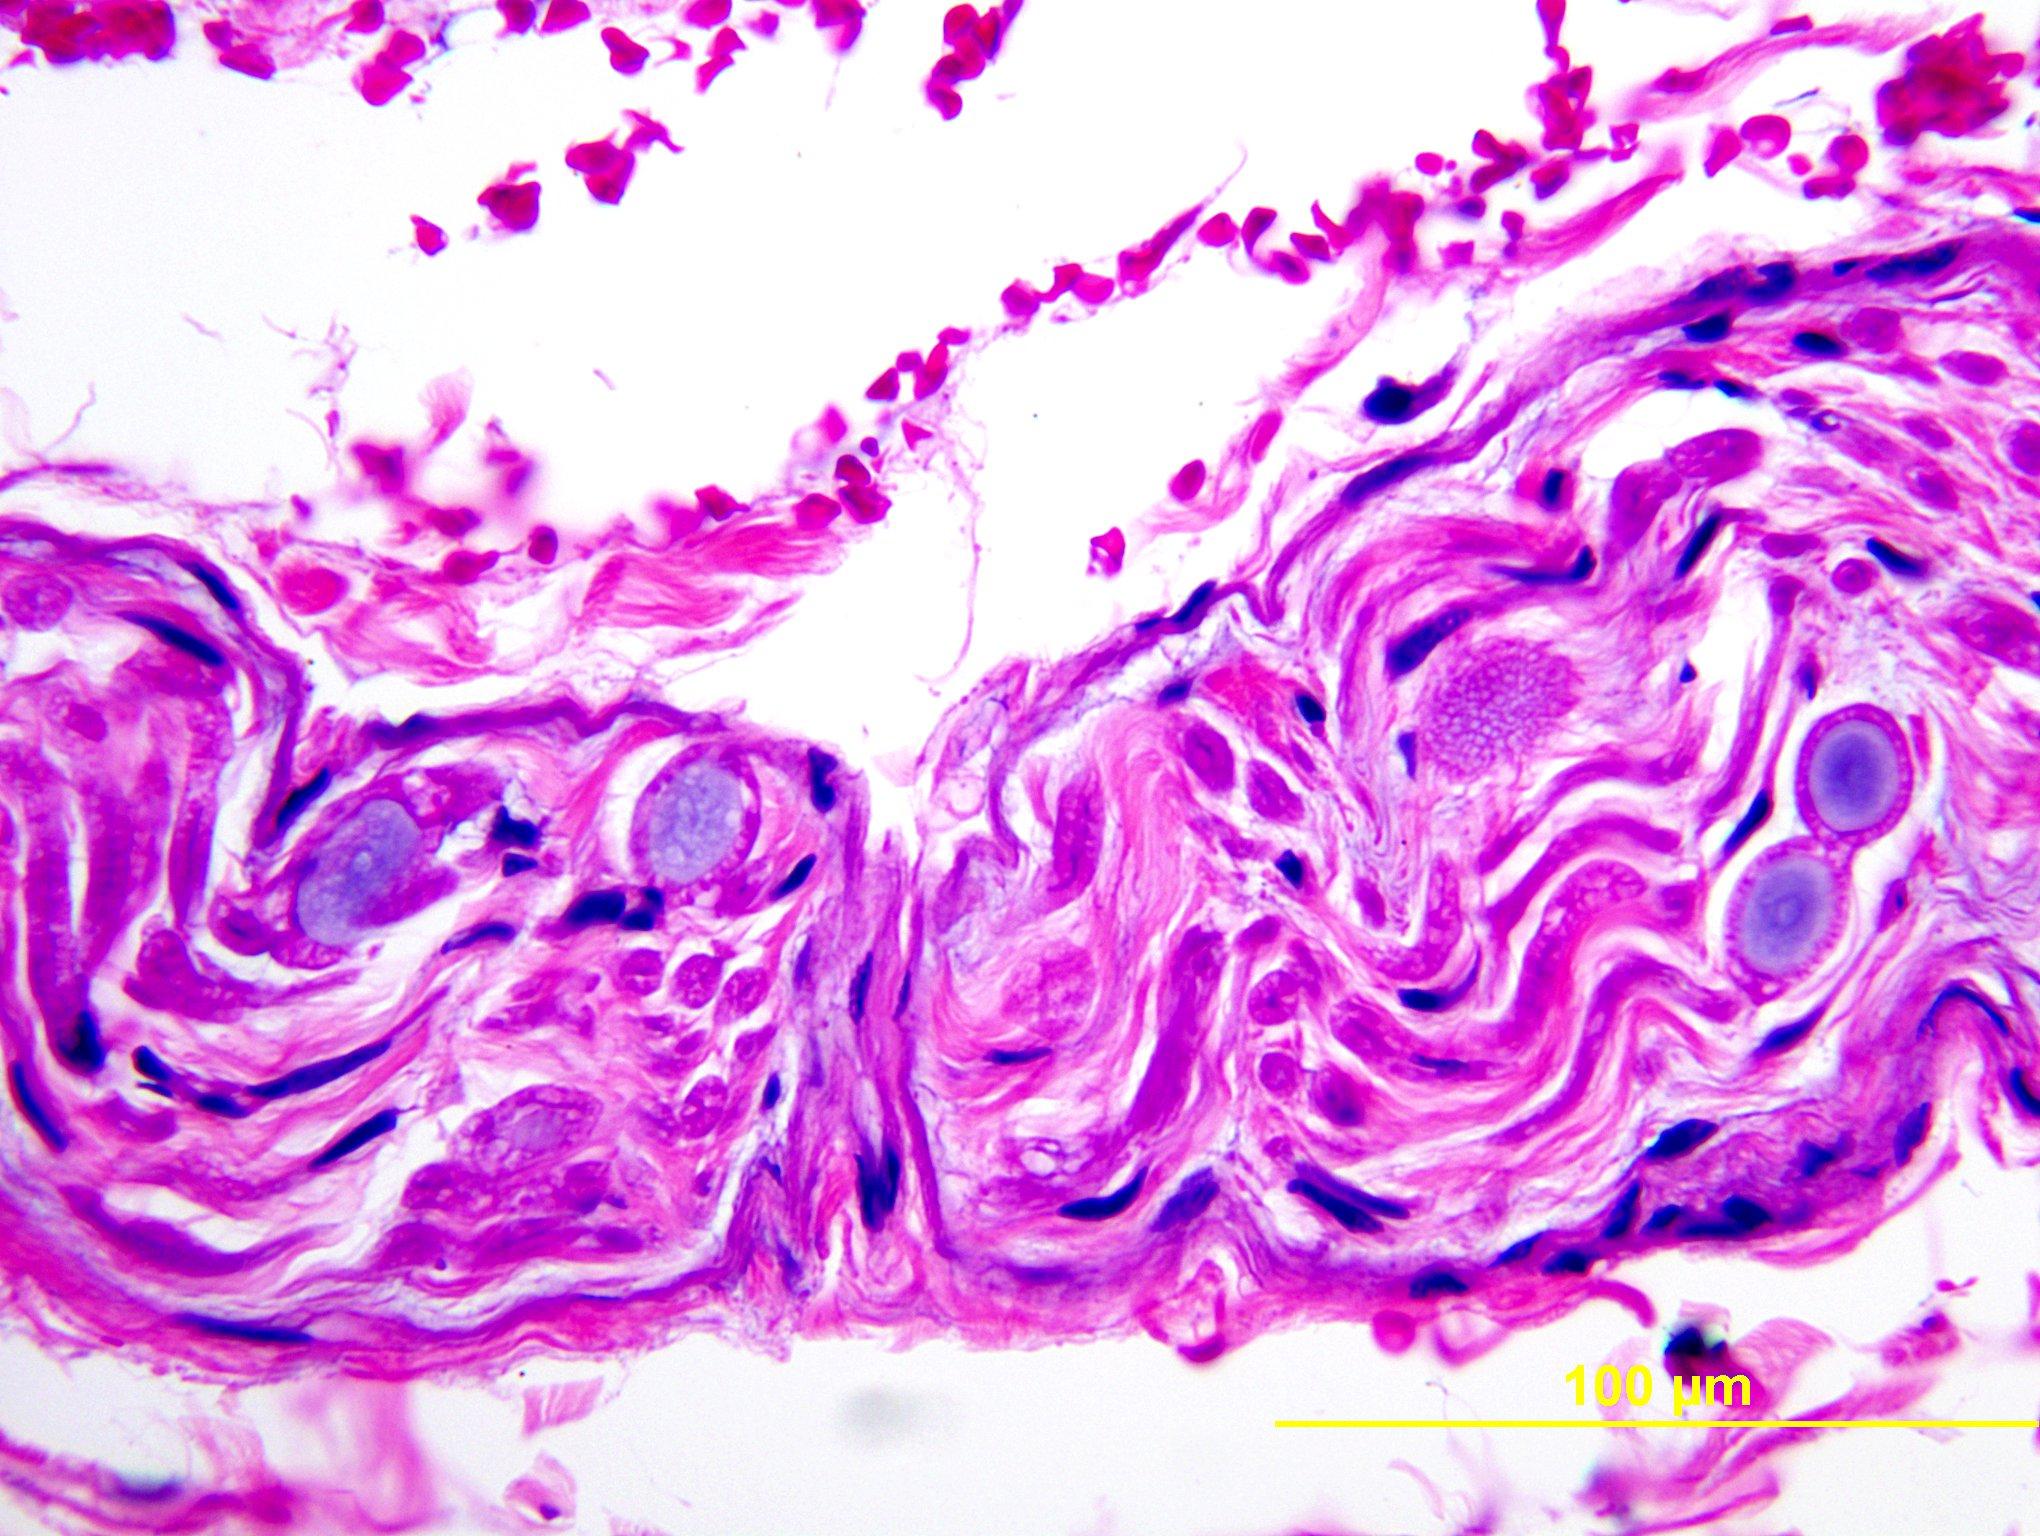 Polyglucosan body disease, intramuscular nerve twig, H&E stained x 400